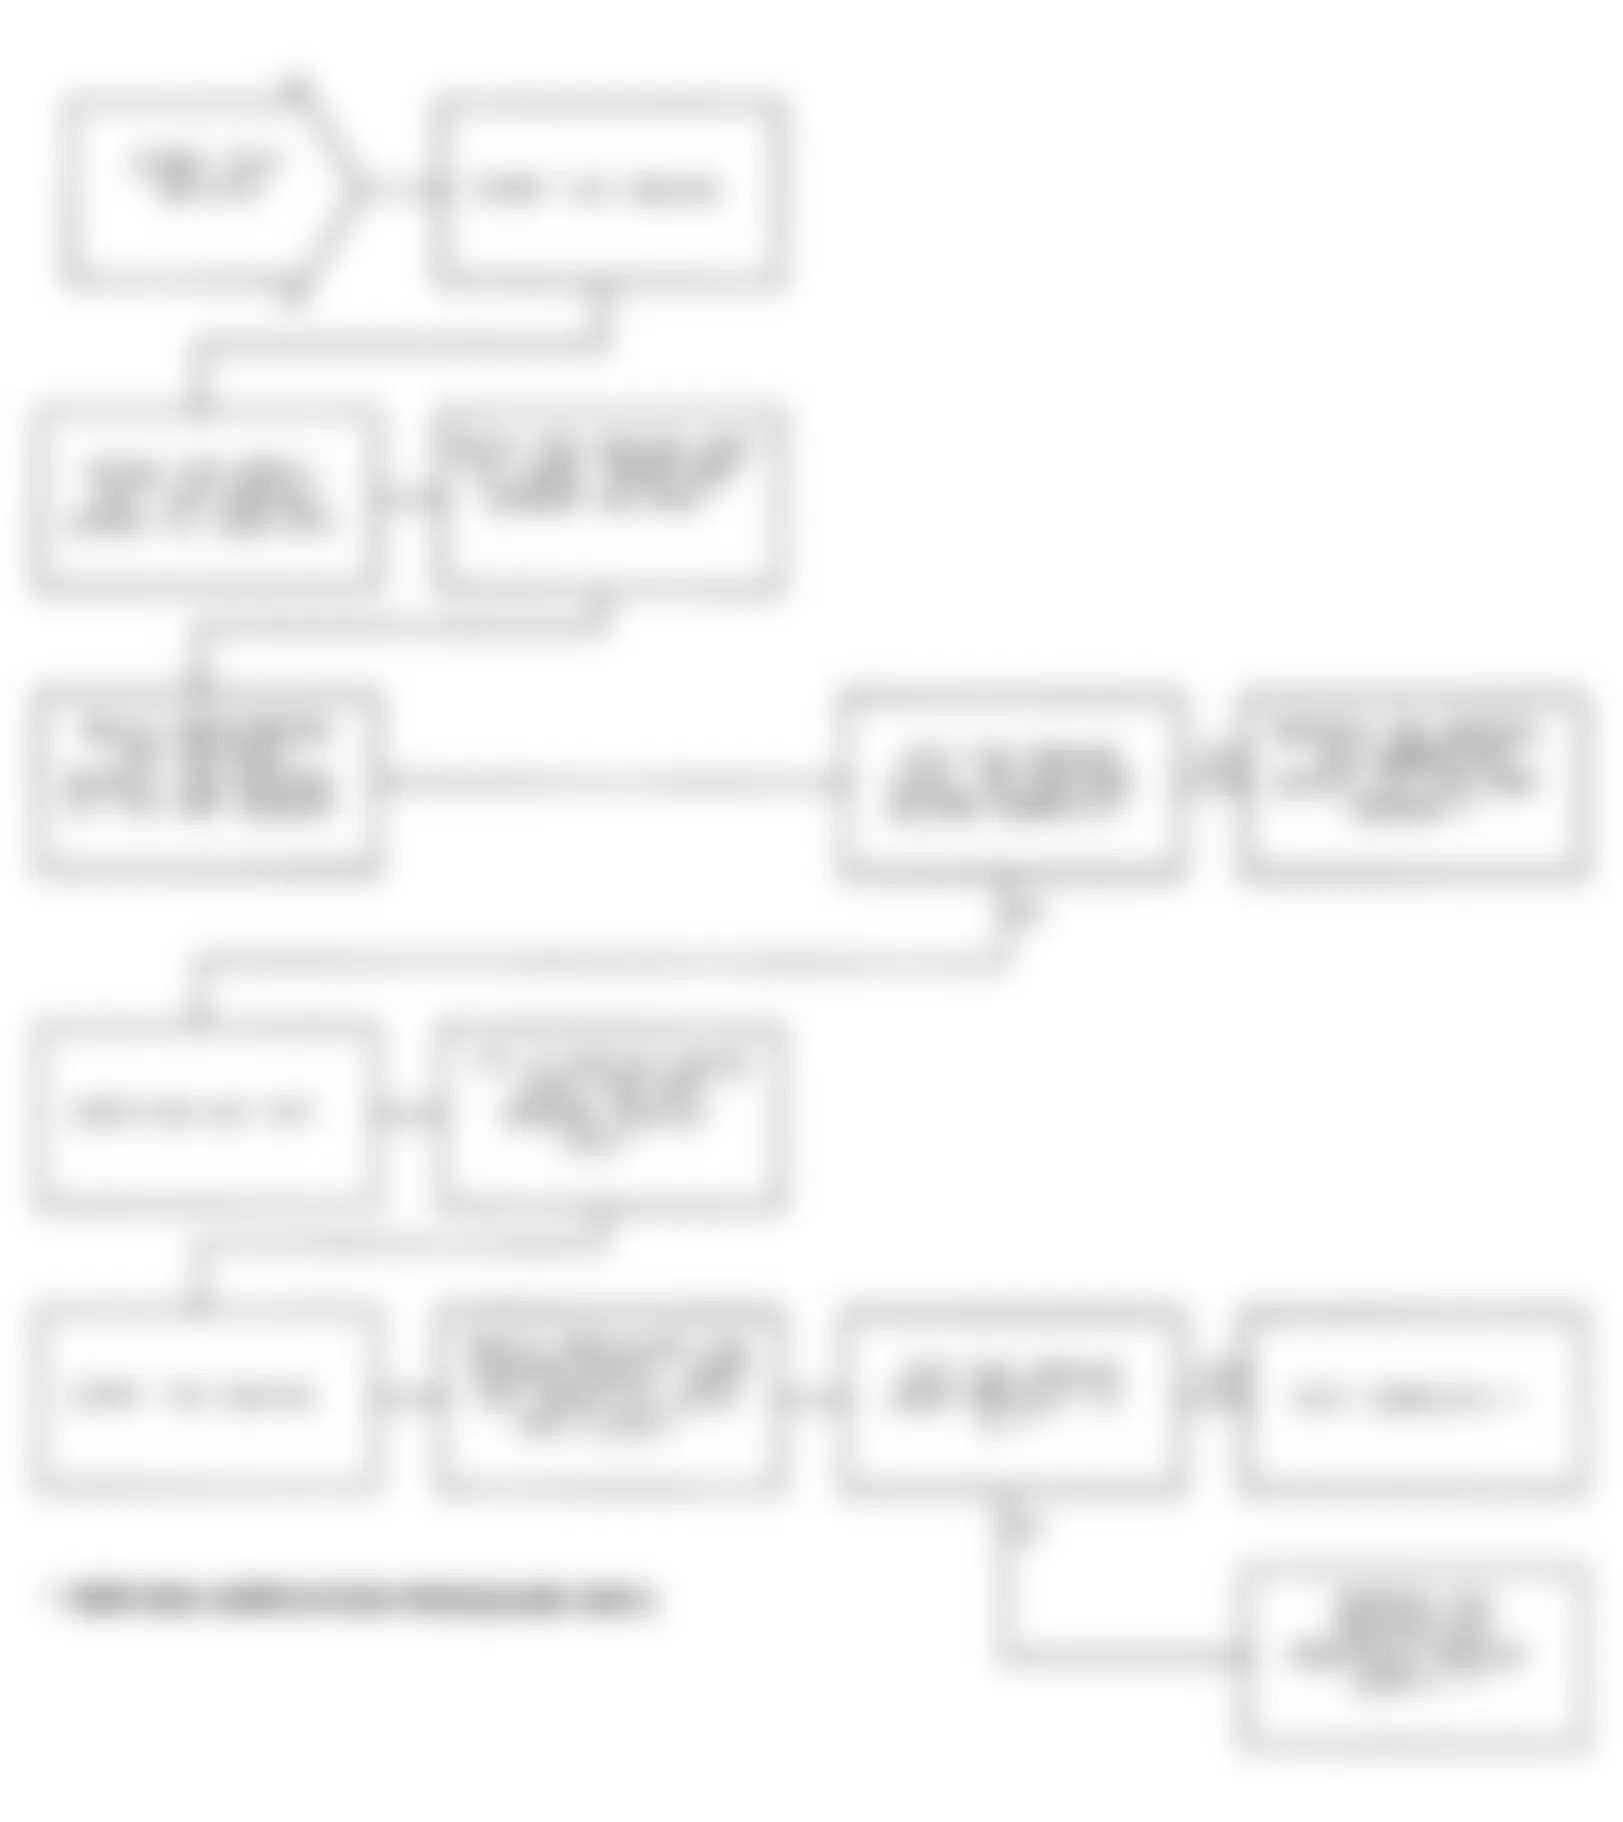 Chrysler Imperial 1991 - Component Locations -  Test DR-47B: Flowchart